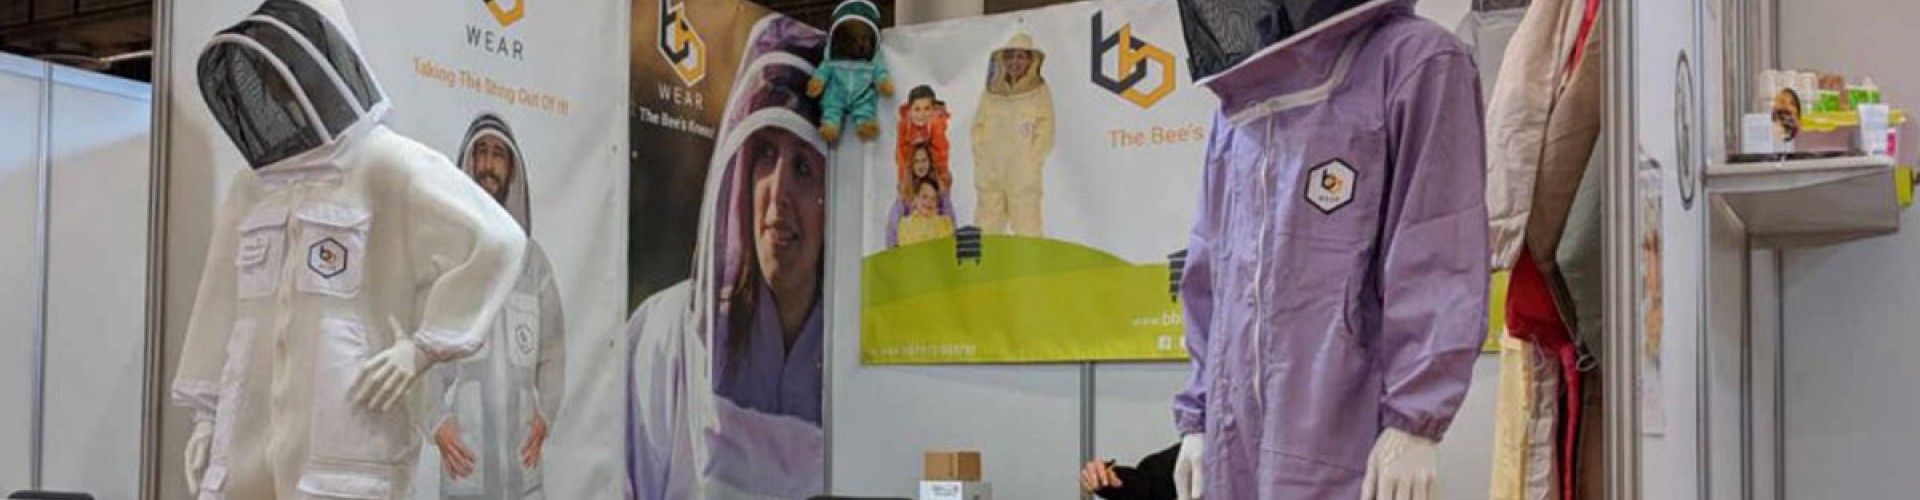 trade stand with mannequins in bee suits 